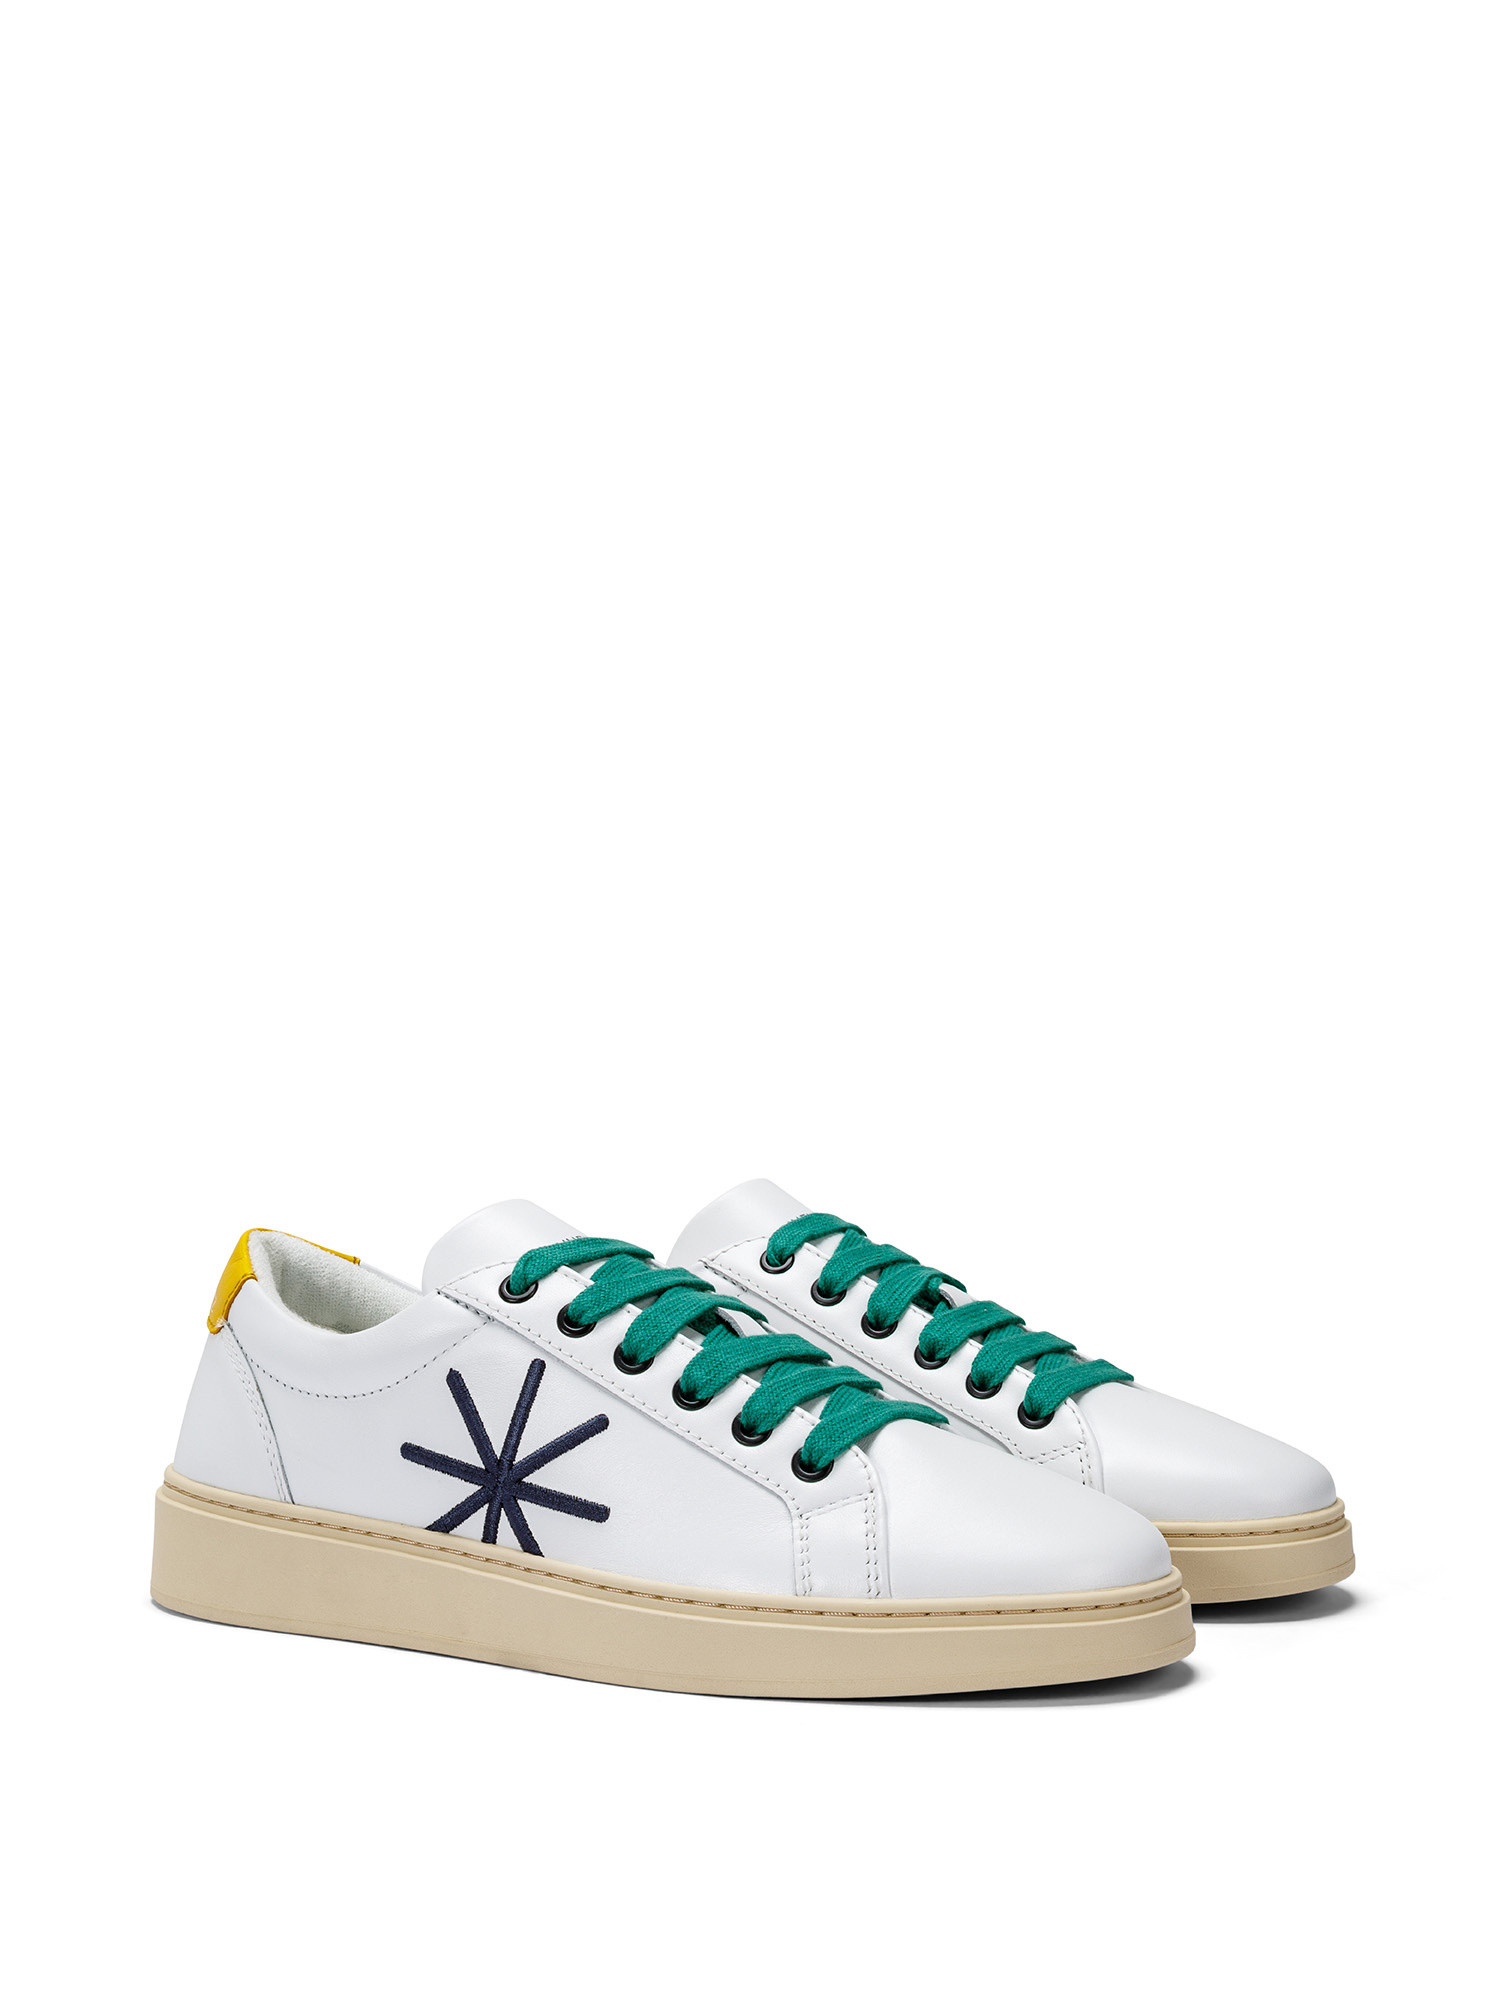 Manuel Ritz - Sneakers in pelle con logo, Bianco, large image number 1